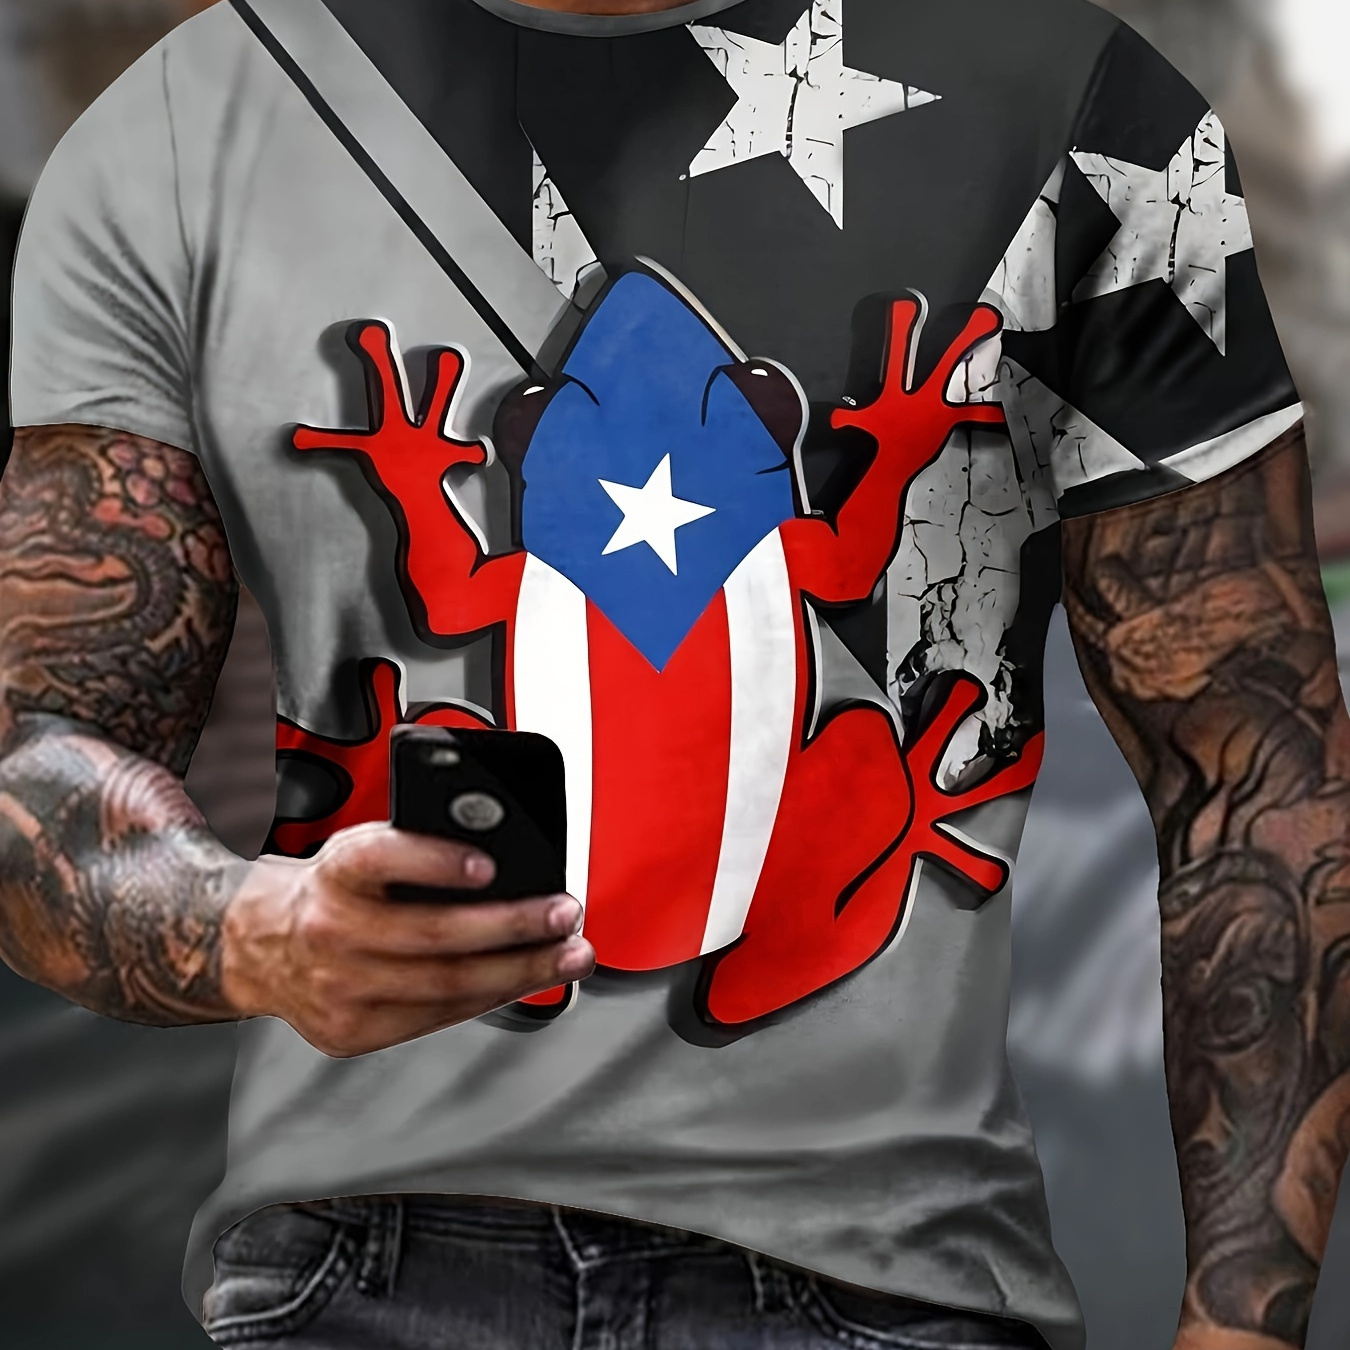 

Men's Comic Style Puerto Rico Theme Frog Pattern Print Crew Neck And Short Sleeve T-shirt For Summer Outdoors Wear, Novel And Chic Tops For Men